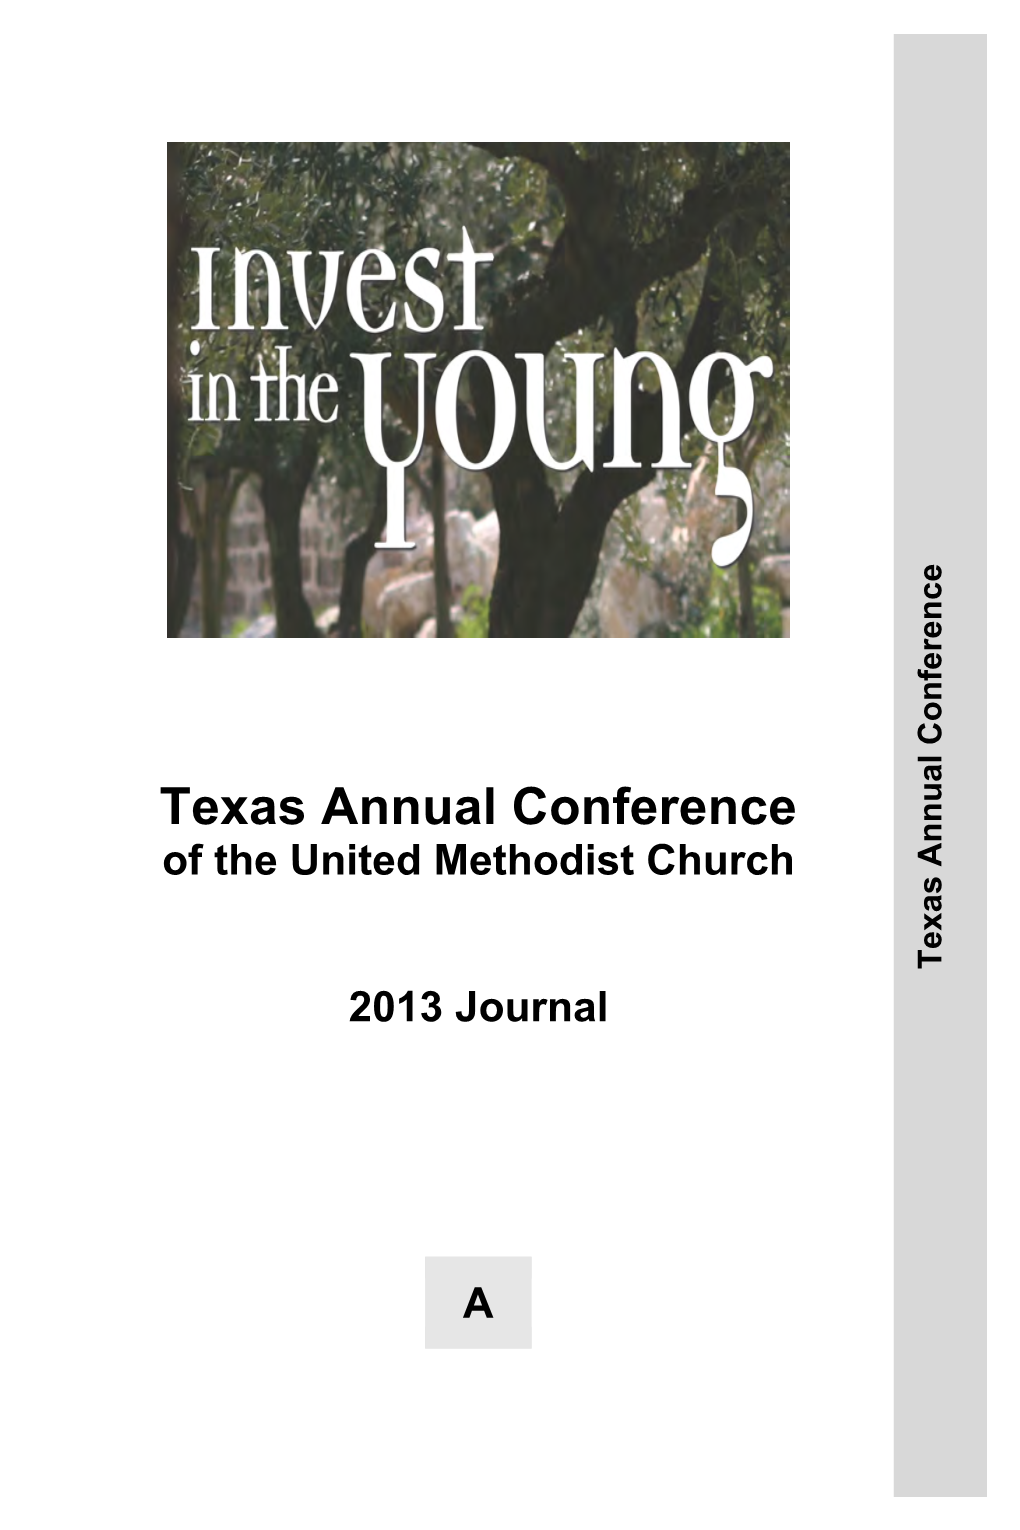 JOURNAL of the Texas Annual Conference UNITED METHODIST CHURCH